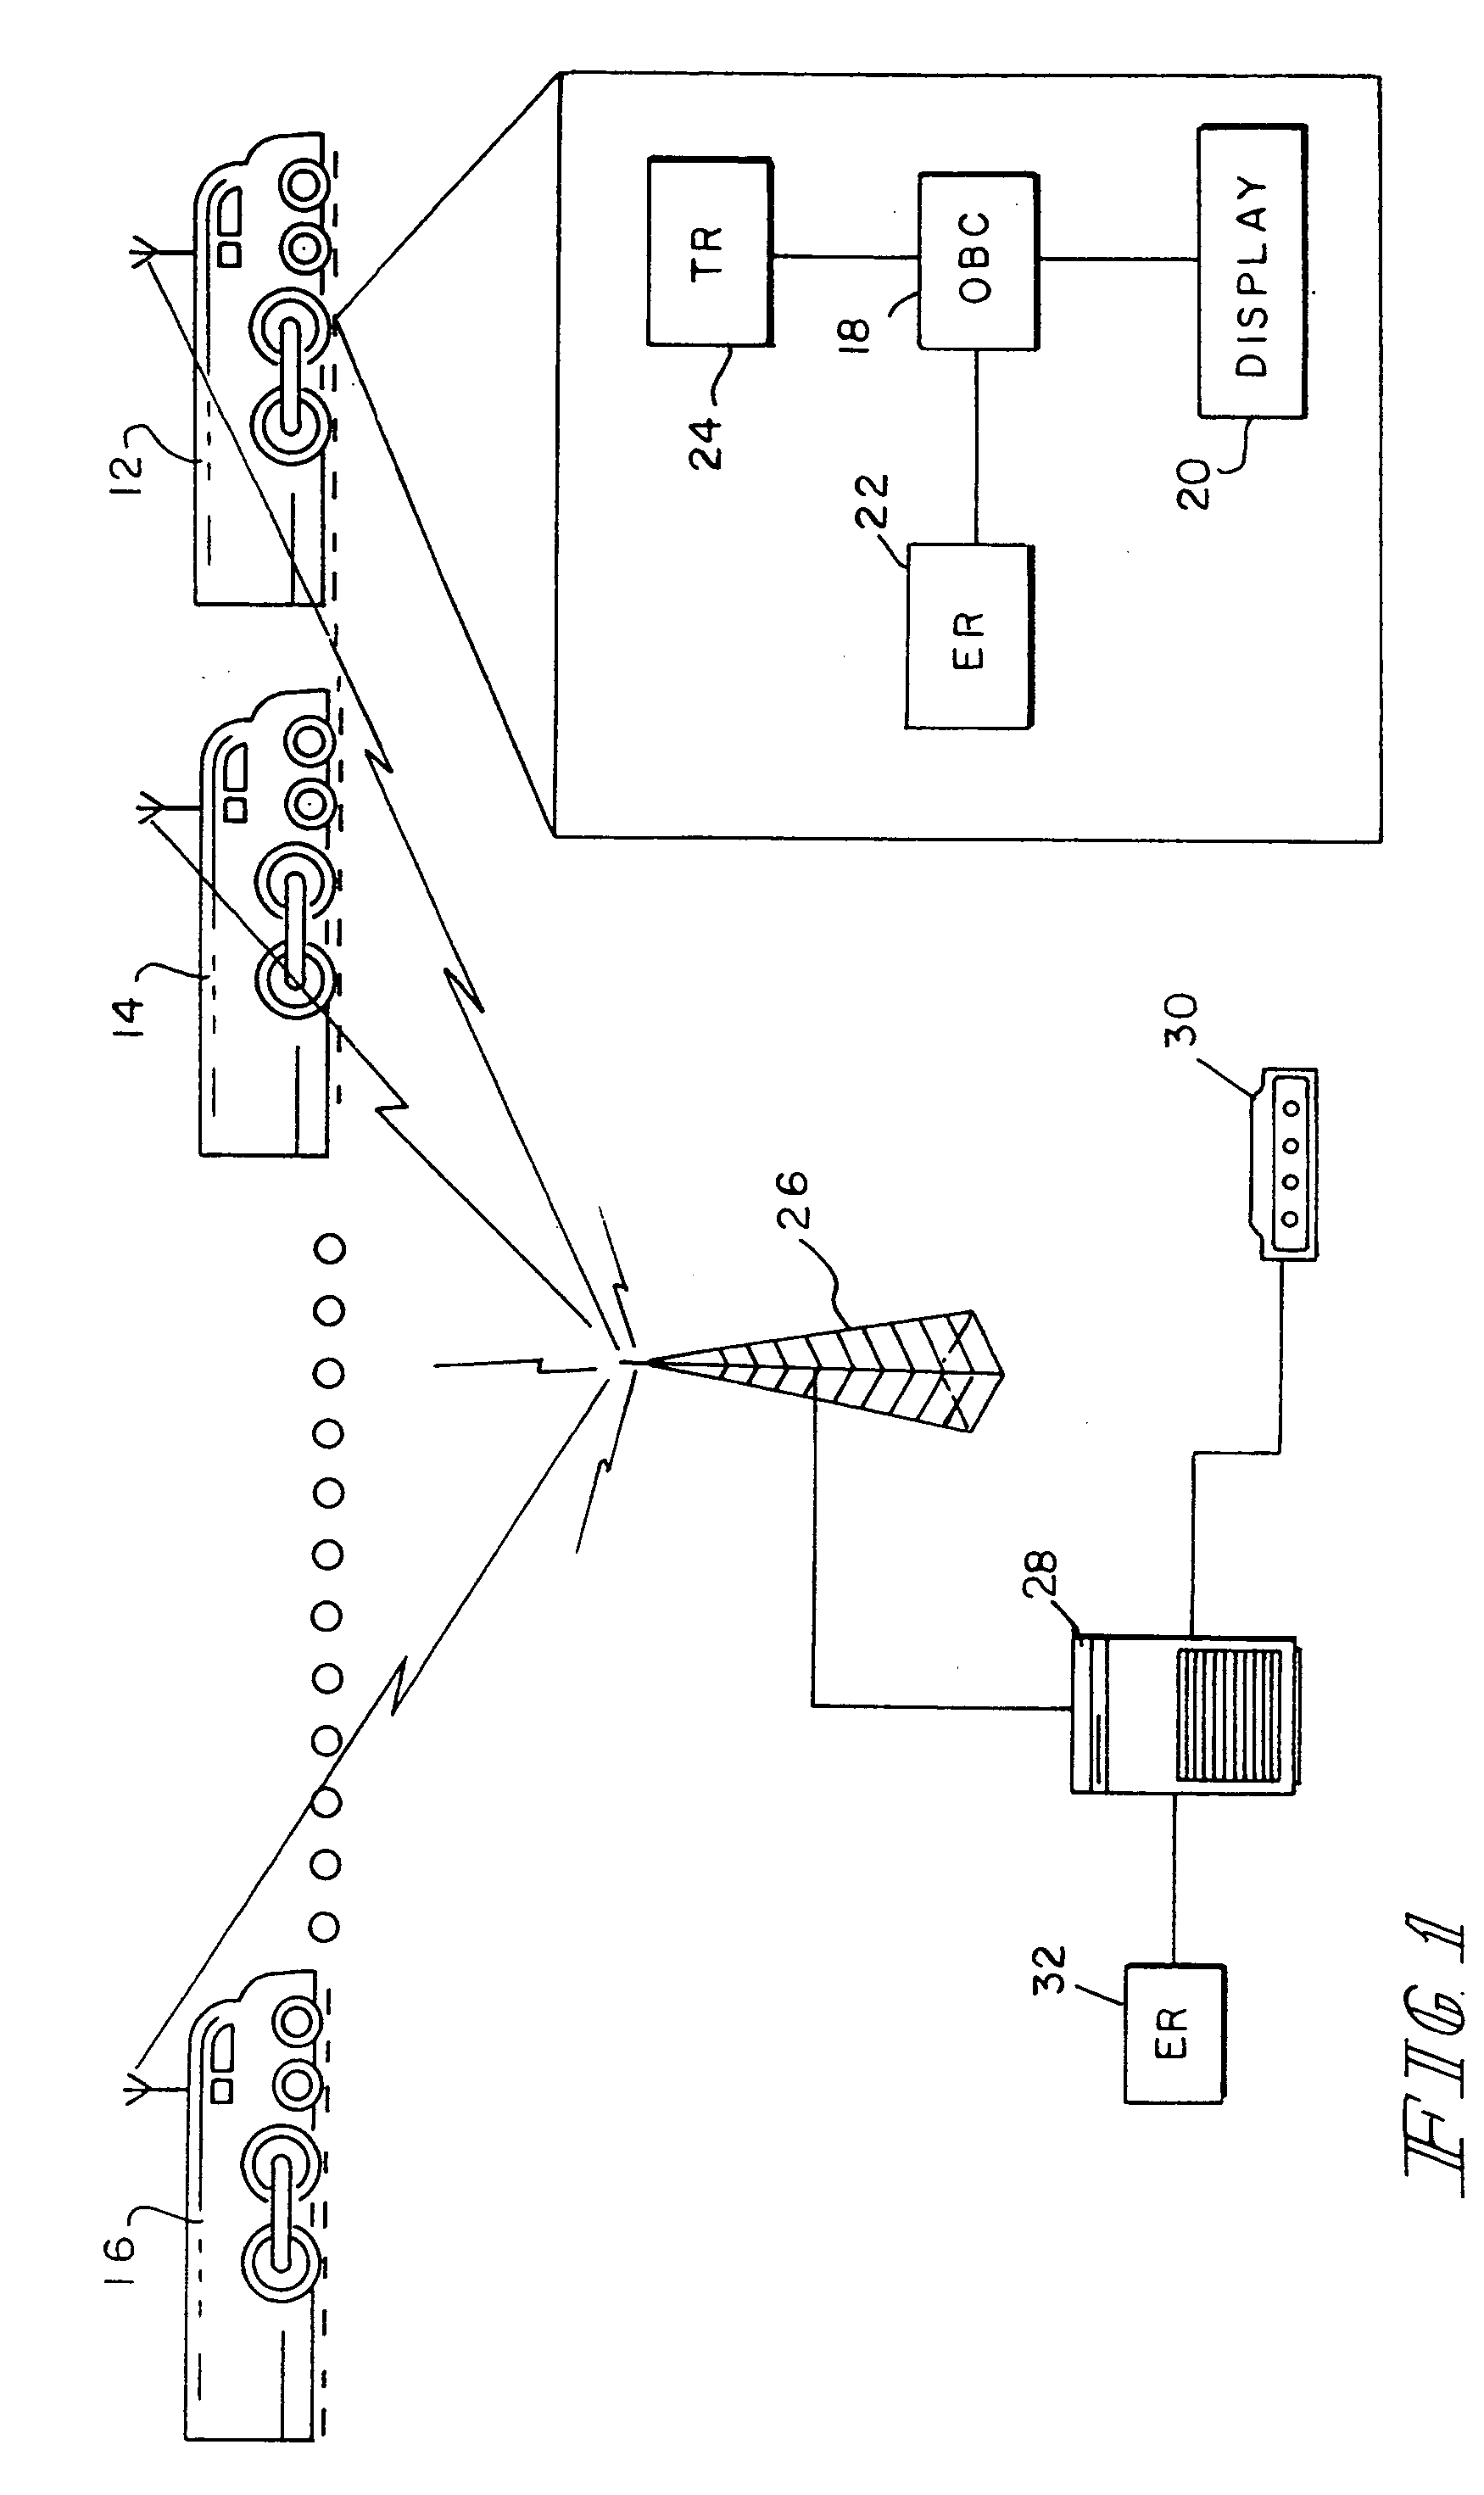 Method of transferring files and analysis of train operational data